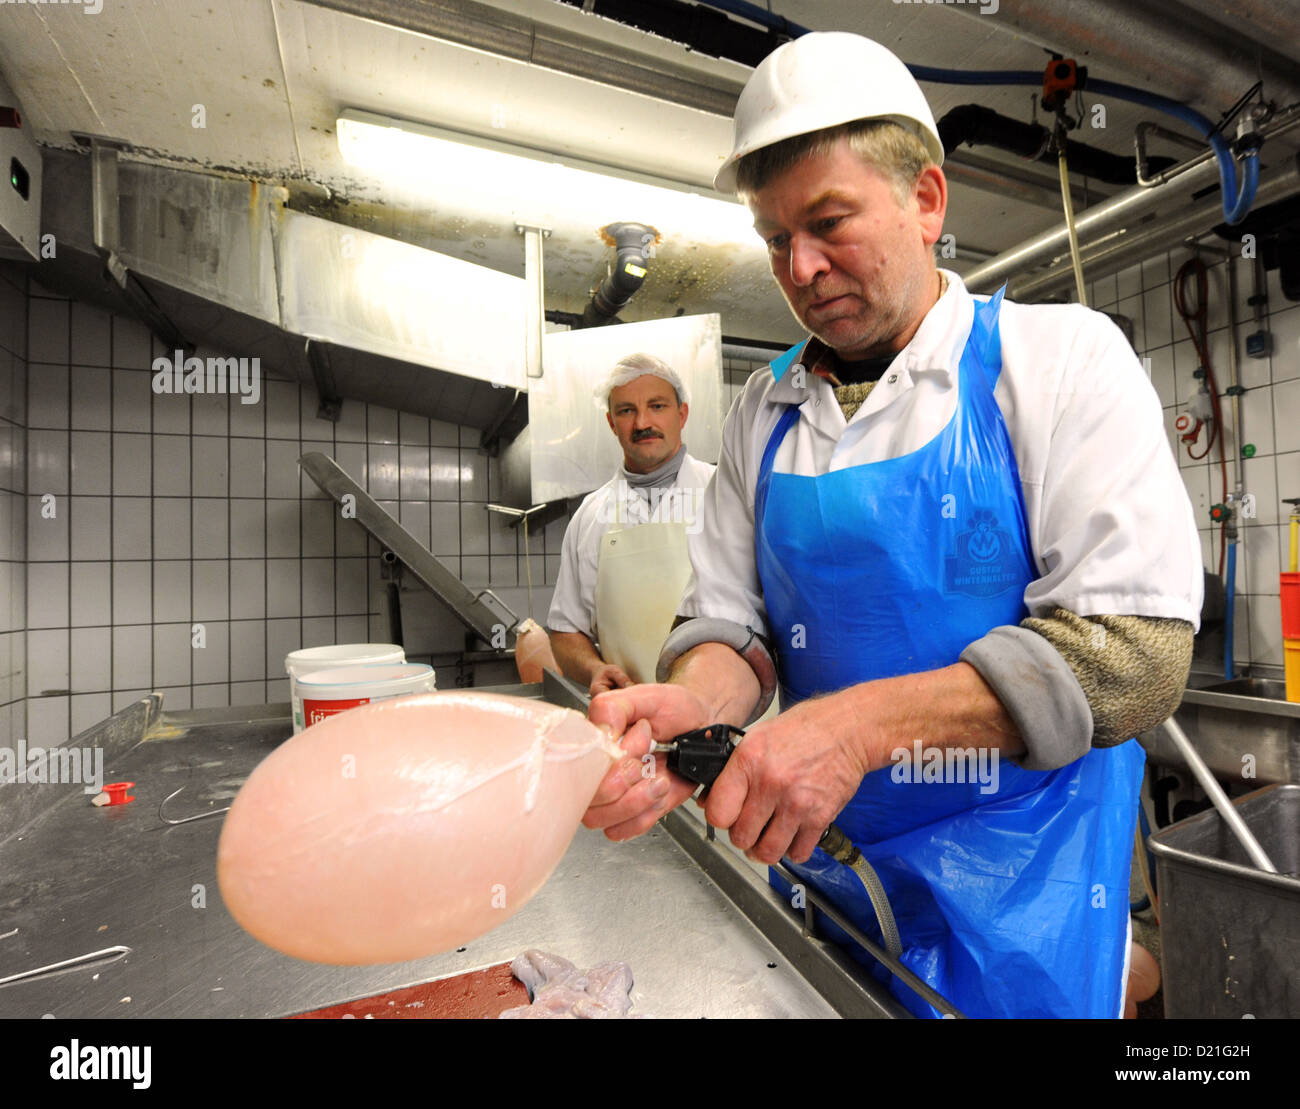 Butcher Hermann Disch from butcher's shop Winterhalter fills up pig bladders with air in Elzach, Germany, 9 January 2013. The pig bladders are used for the carnival parade. Photo: Patrick Seeger Stock Photo